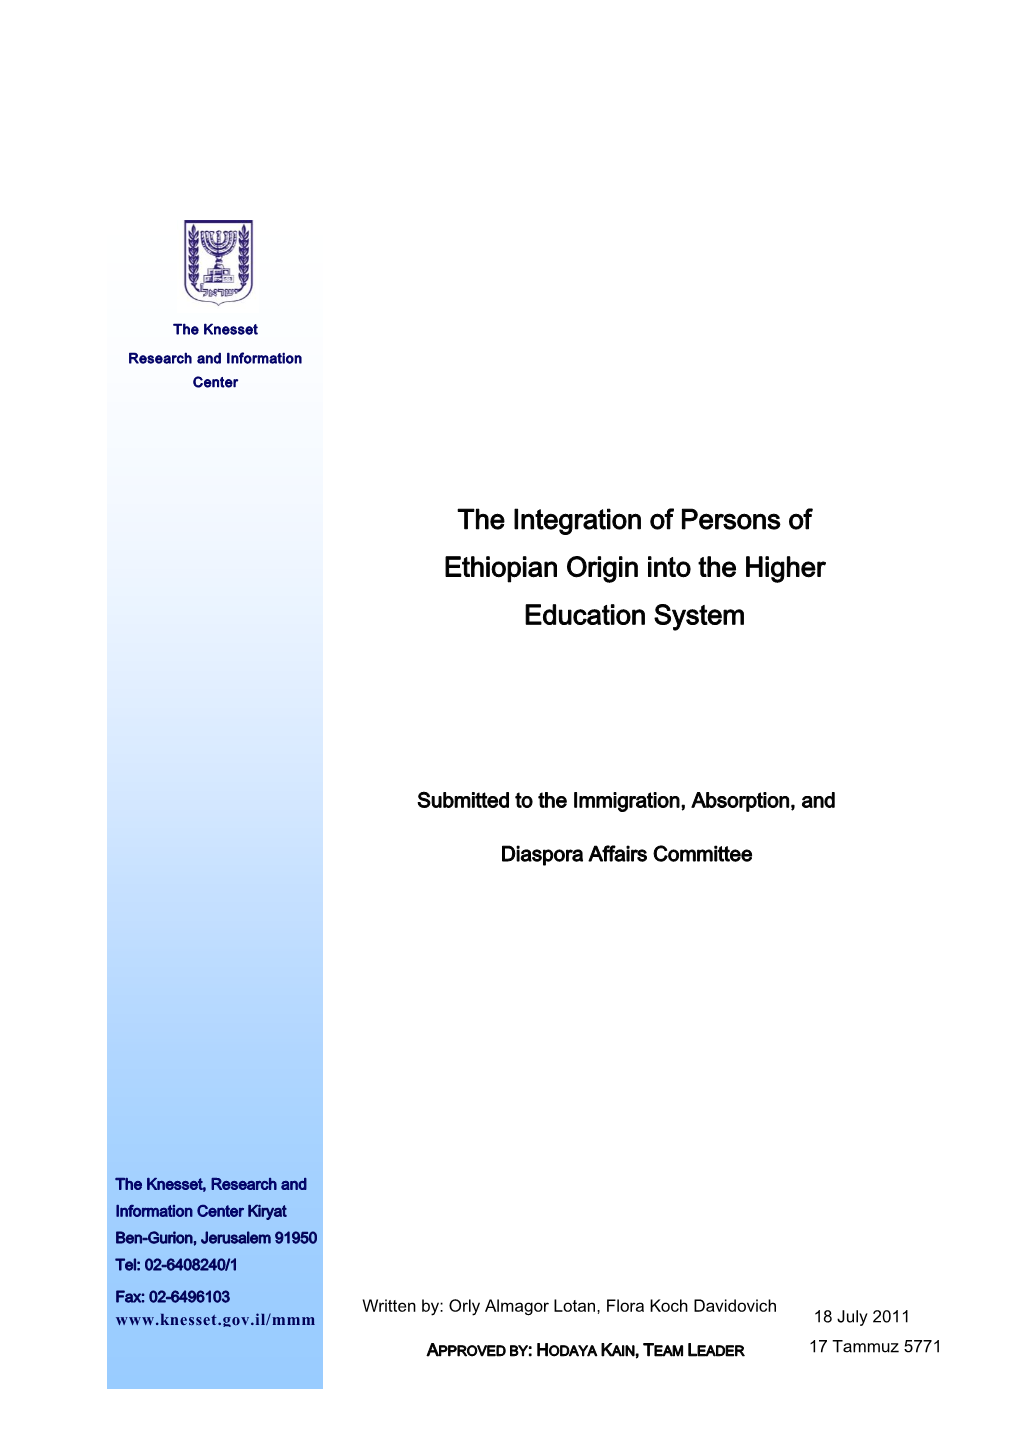 The Integration of Persons of Ethiopian Origin Into the Higher